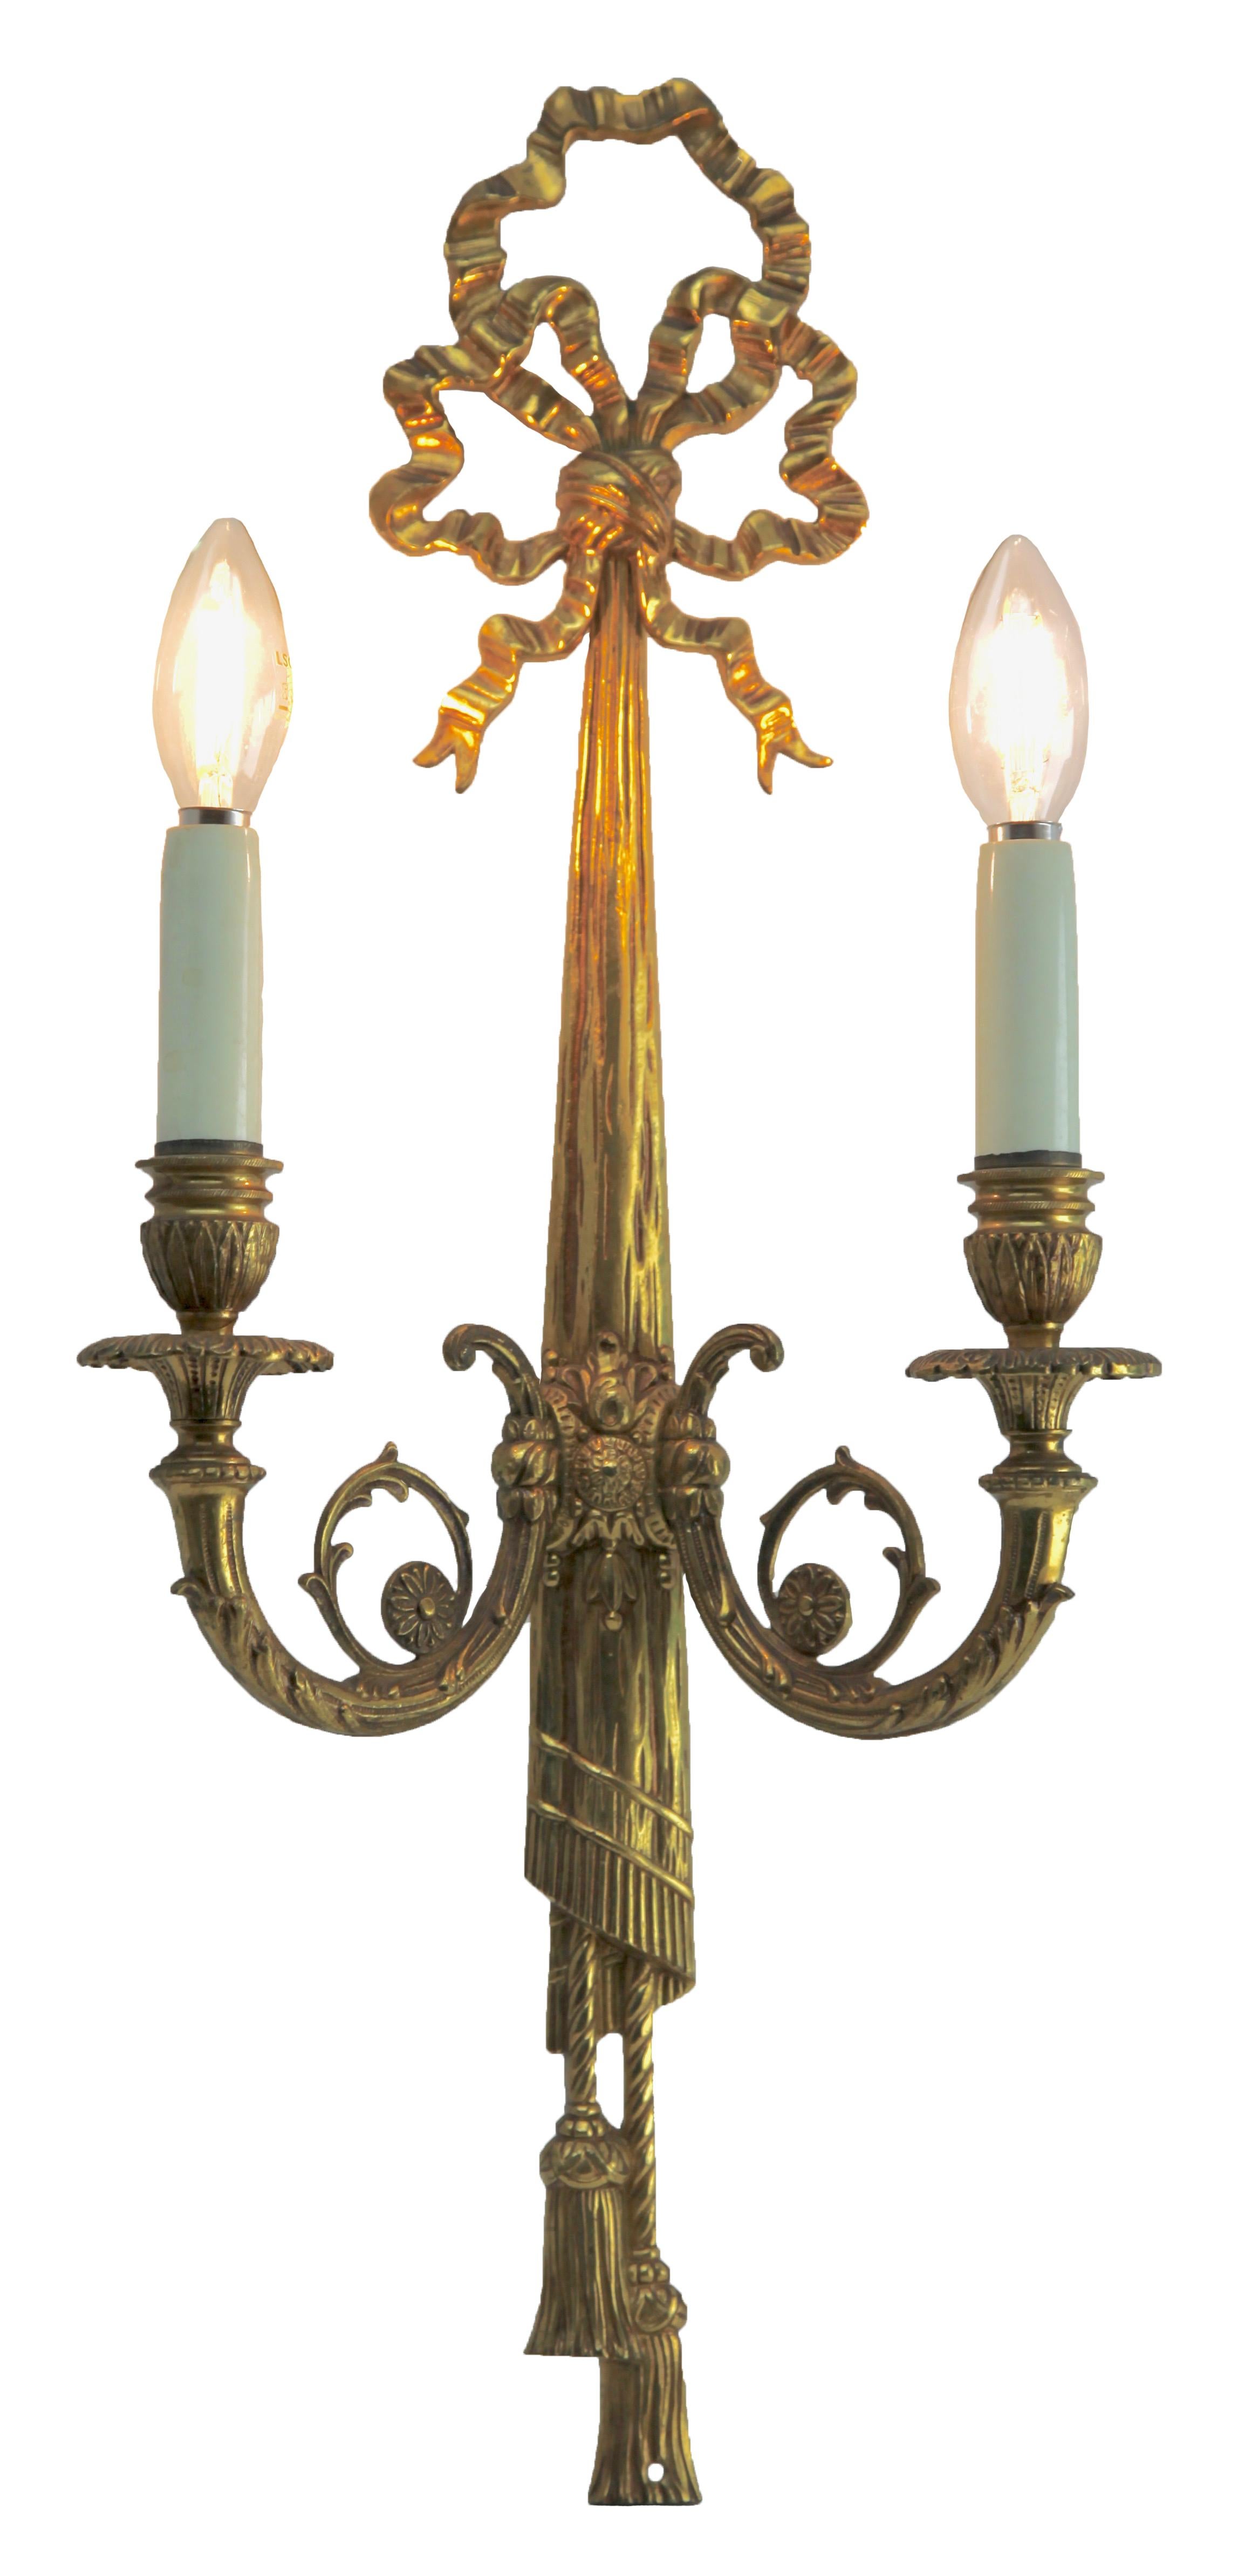 Pair of cast brass sconces (electroliers) in the Louis XVI style, each with two candle-fittings for electric lamps.
Decorated with ribbons and drapery with tassels and each having two arms with rococo scrolls and detail supporting a faux candle in